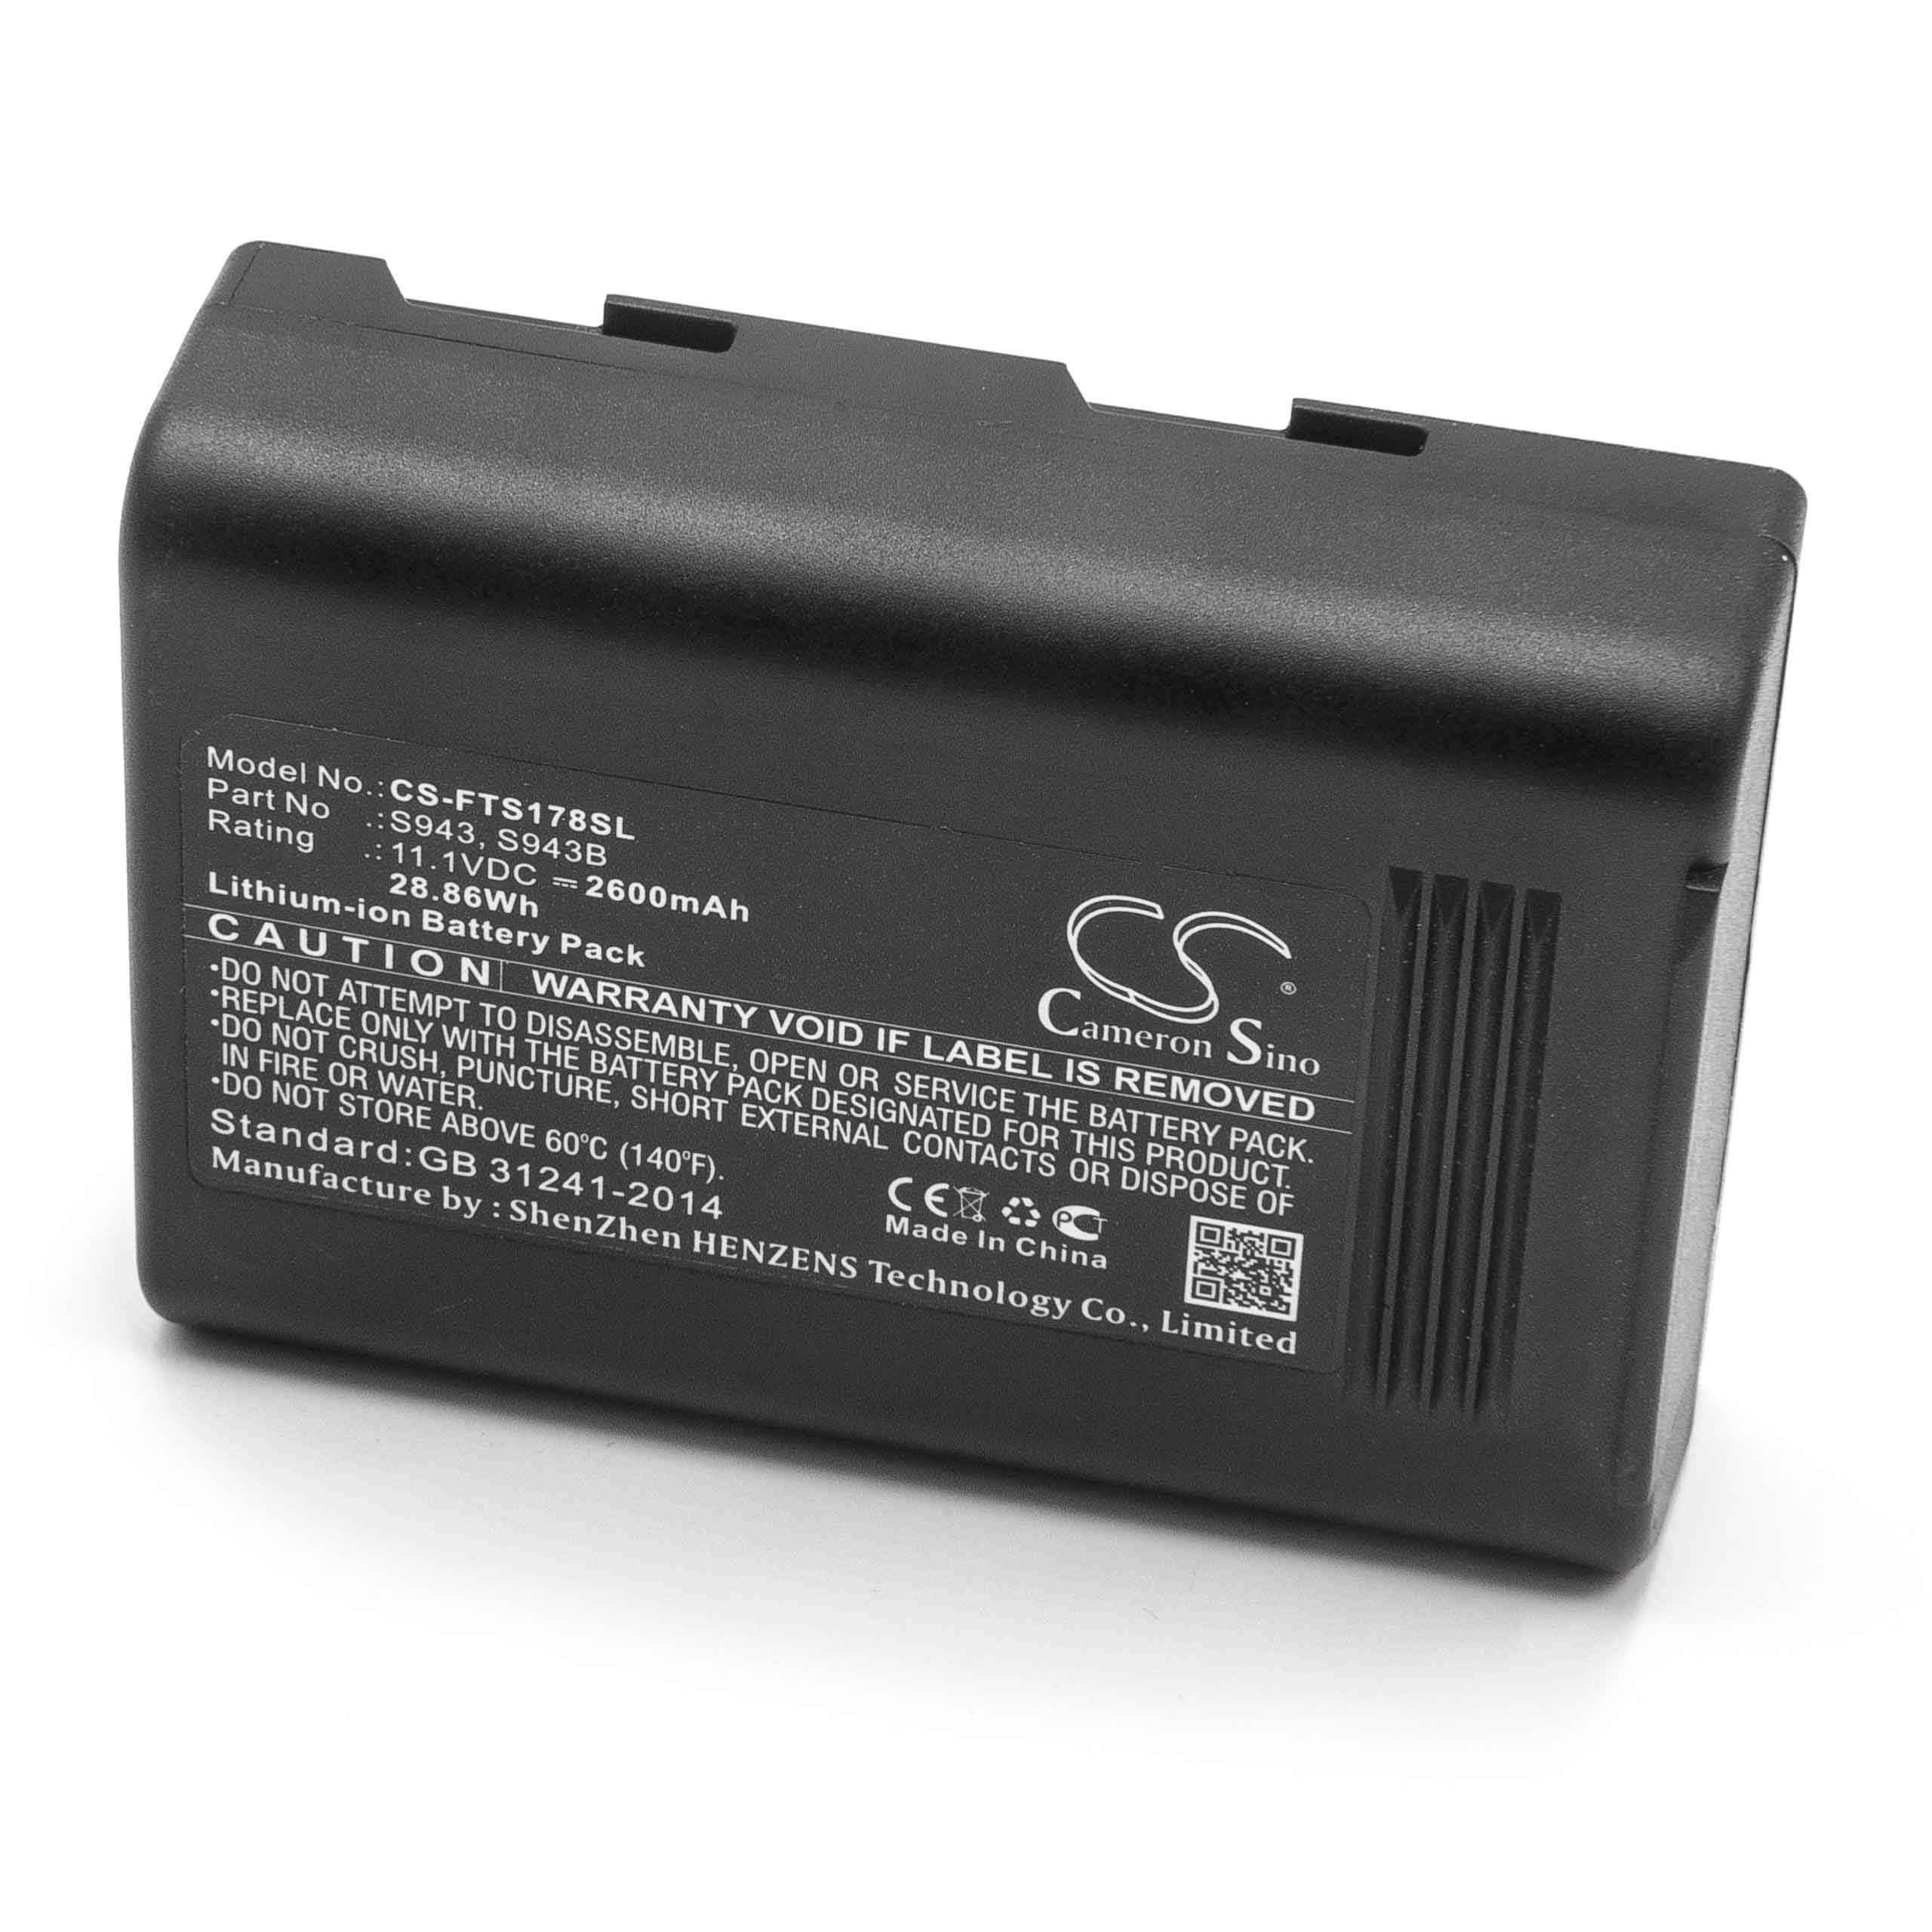 Fusion Splicer Battery Replacement for FITEL S943B, S943 - 2600mAh 11.1V Li-Ion